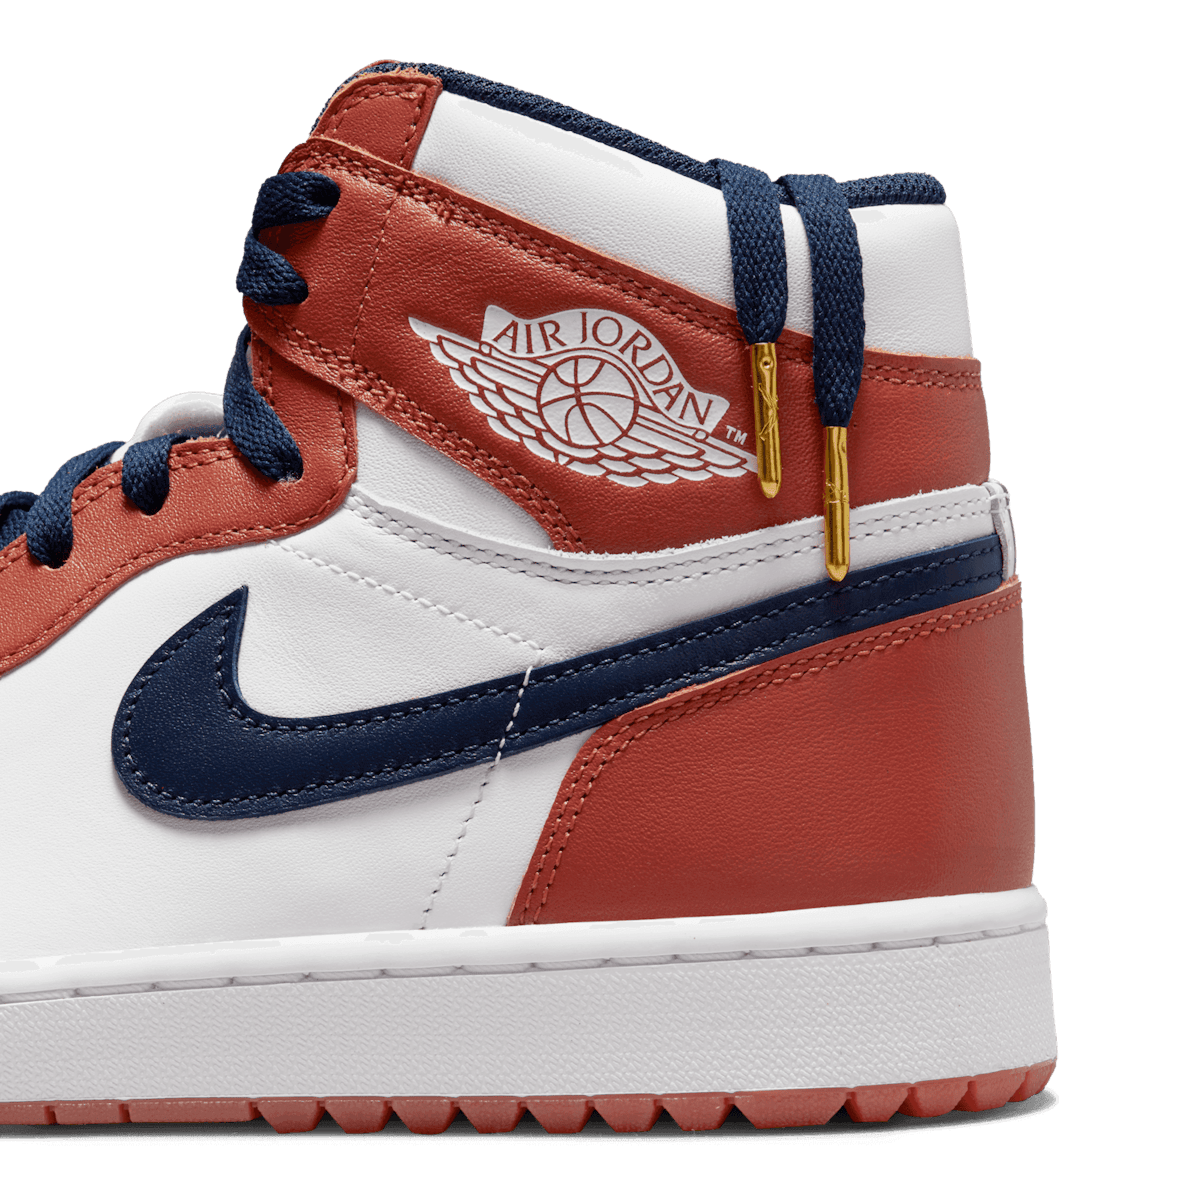 Jordan 1 High Eastside Golf Out of the Mud Angle 7